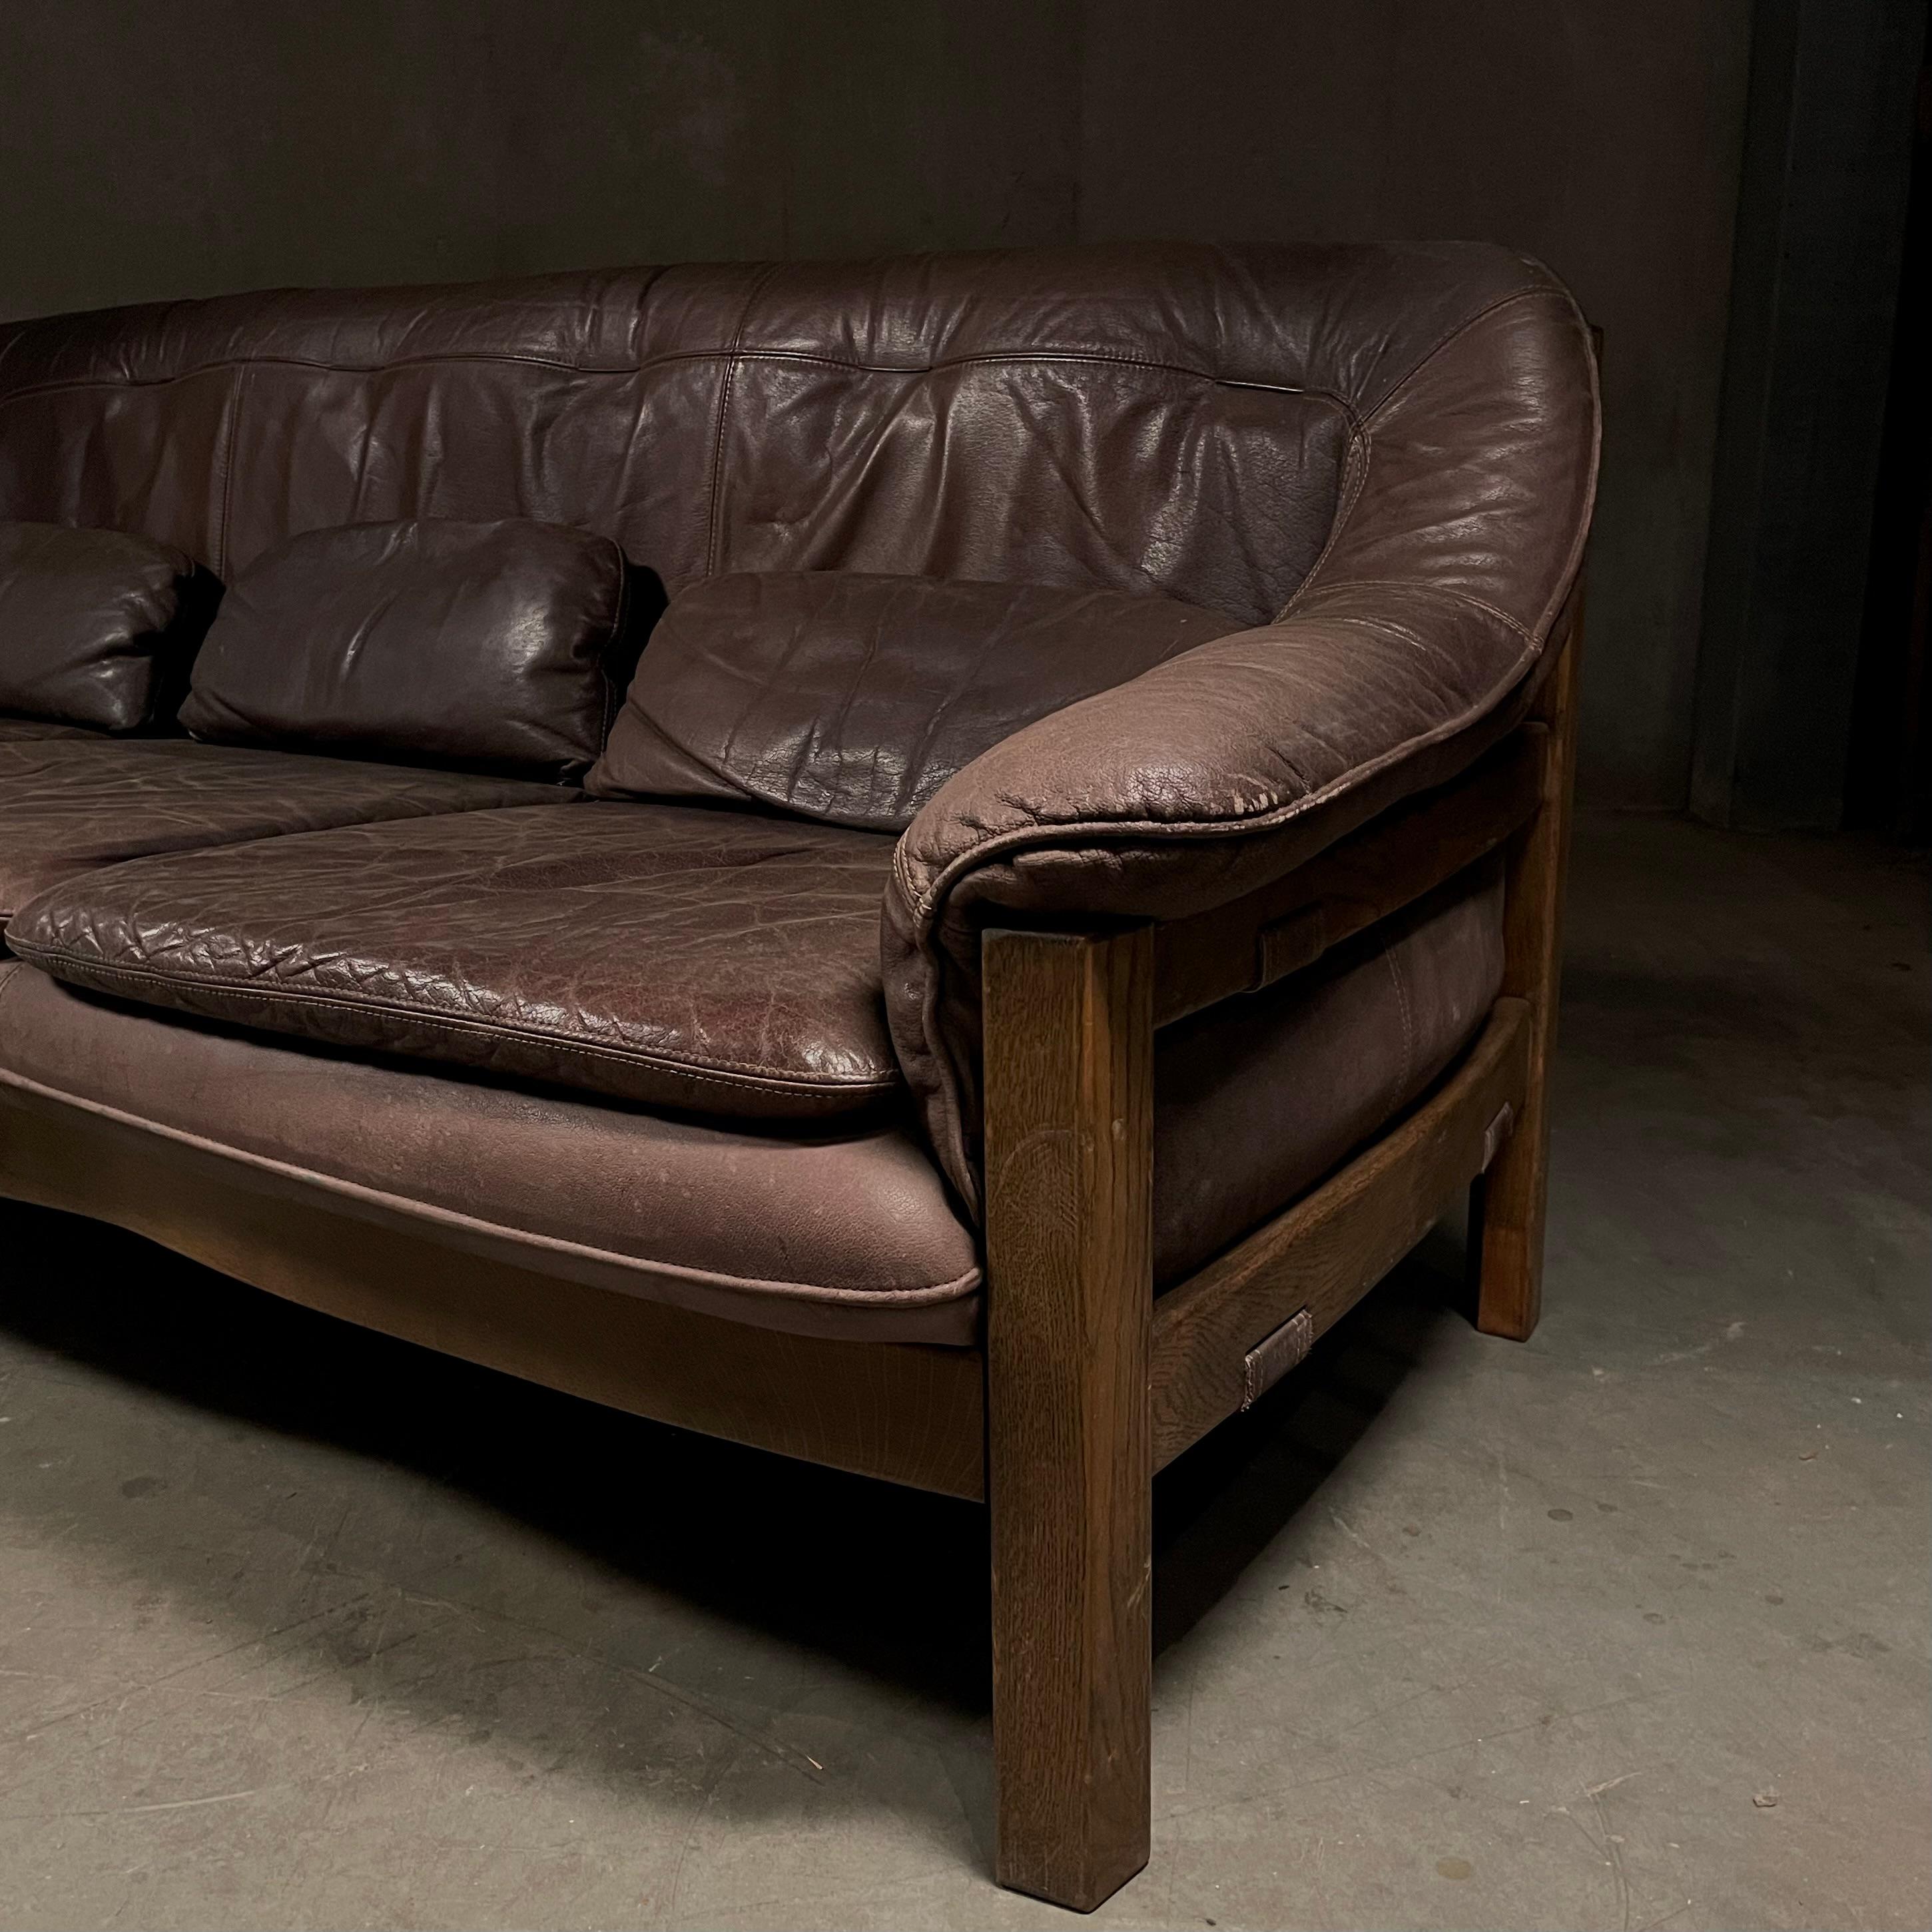 A great quality leather sofa made in Germany  with beautiful solid wood  frame .  Found in Texas this piece was imported direct from Germany  and  is solid , has no sagging and extremely comfortable . 

Manufactured by Hain & Thome... 


